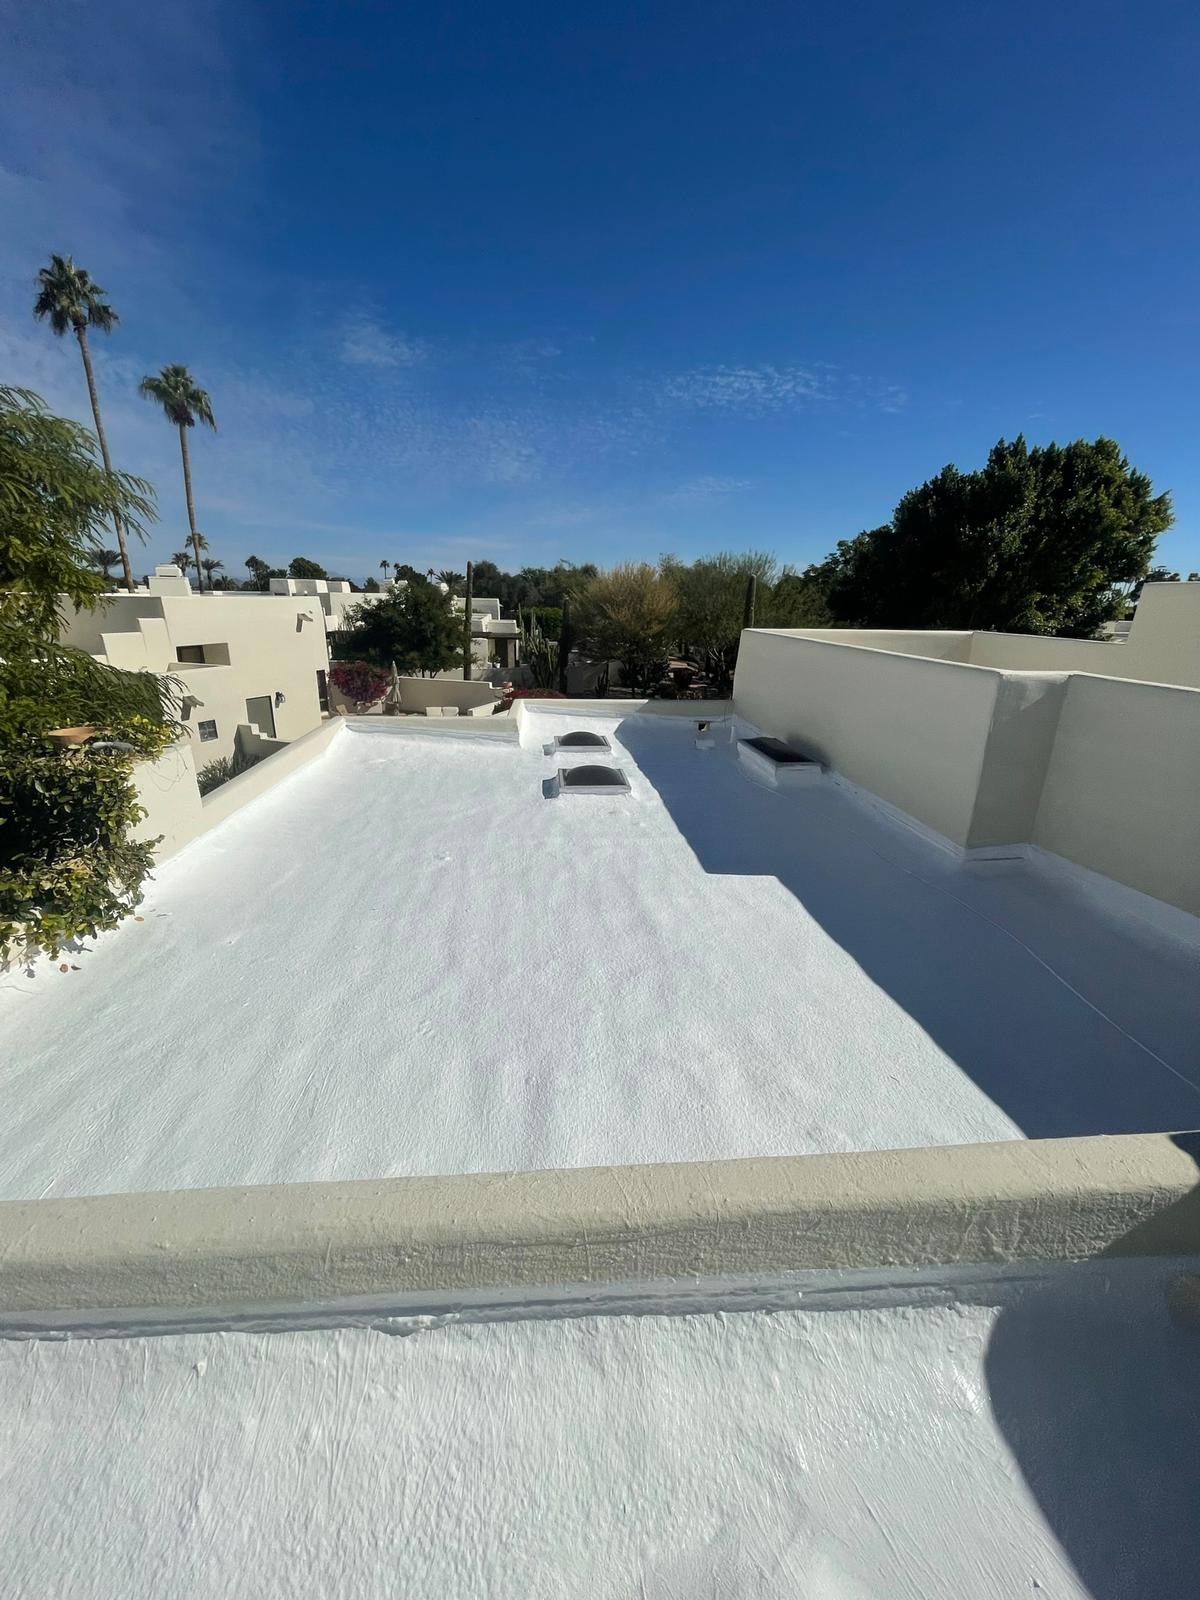 Freshly completed spray foam installation with a clear coating on a residential building in Mesa, enhancing energy efficiency